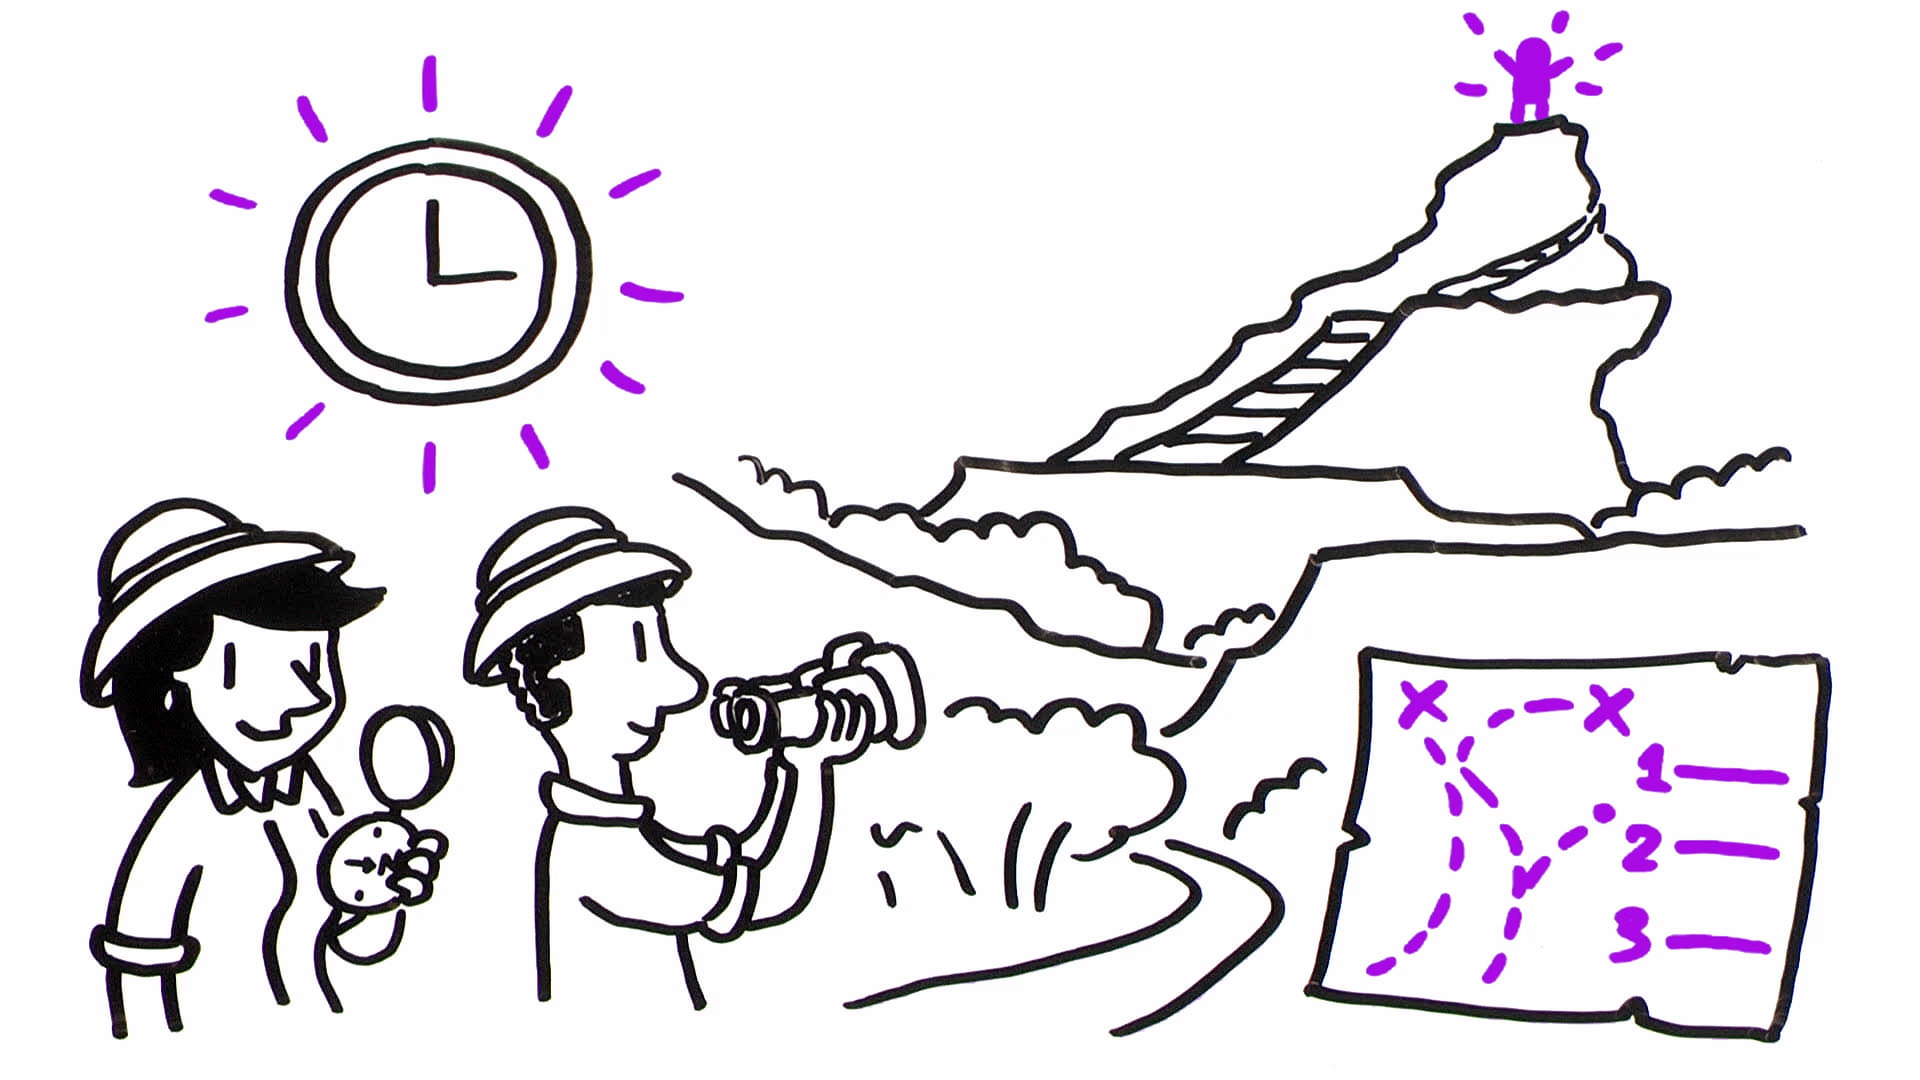 Illustration of two people navigating toward a goal, aided by a map, compass and binoculars